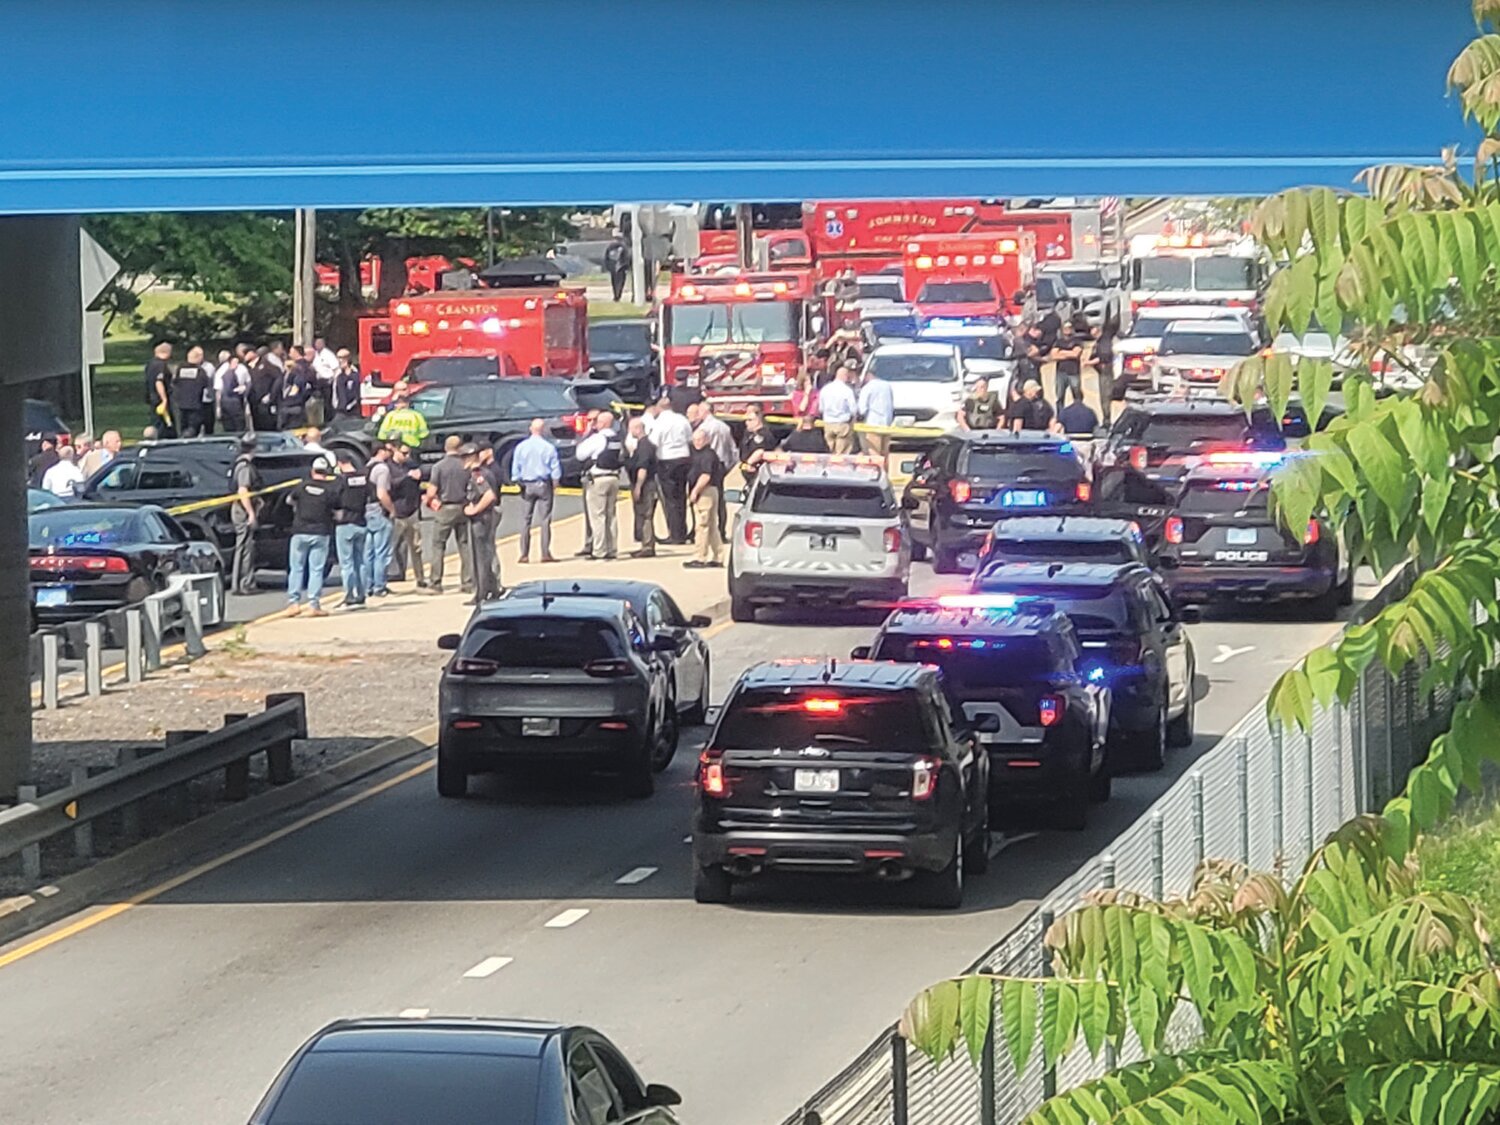 HEAVY POLICE PRESENCE: Police from multiple departments converged on a shooting suspect’s car along Plainfield Pike, on the Johnston/Cranston border, early Wednesday morning, May 24, 2023.